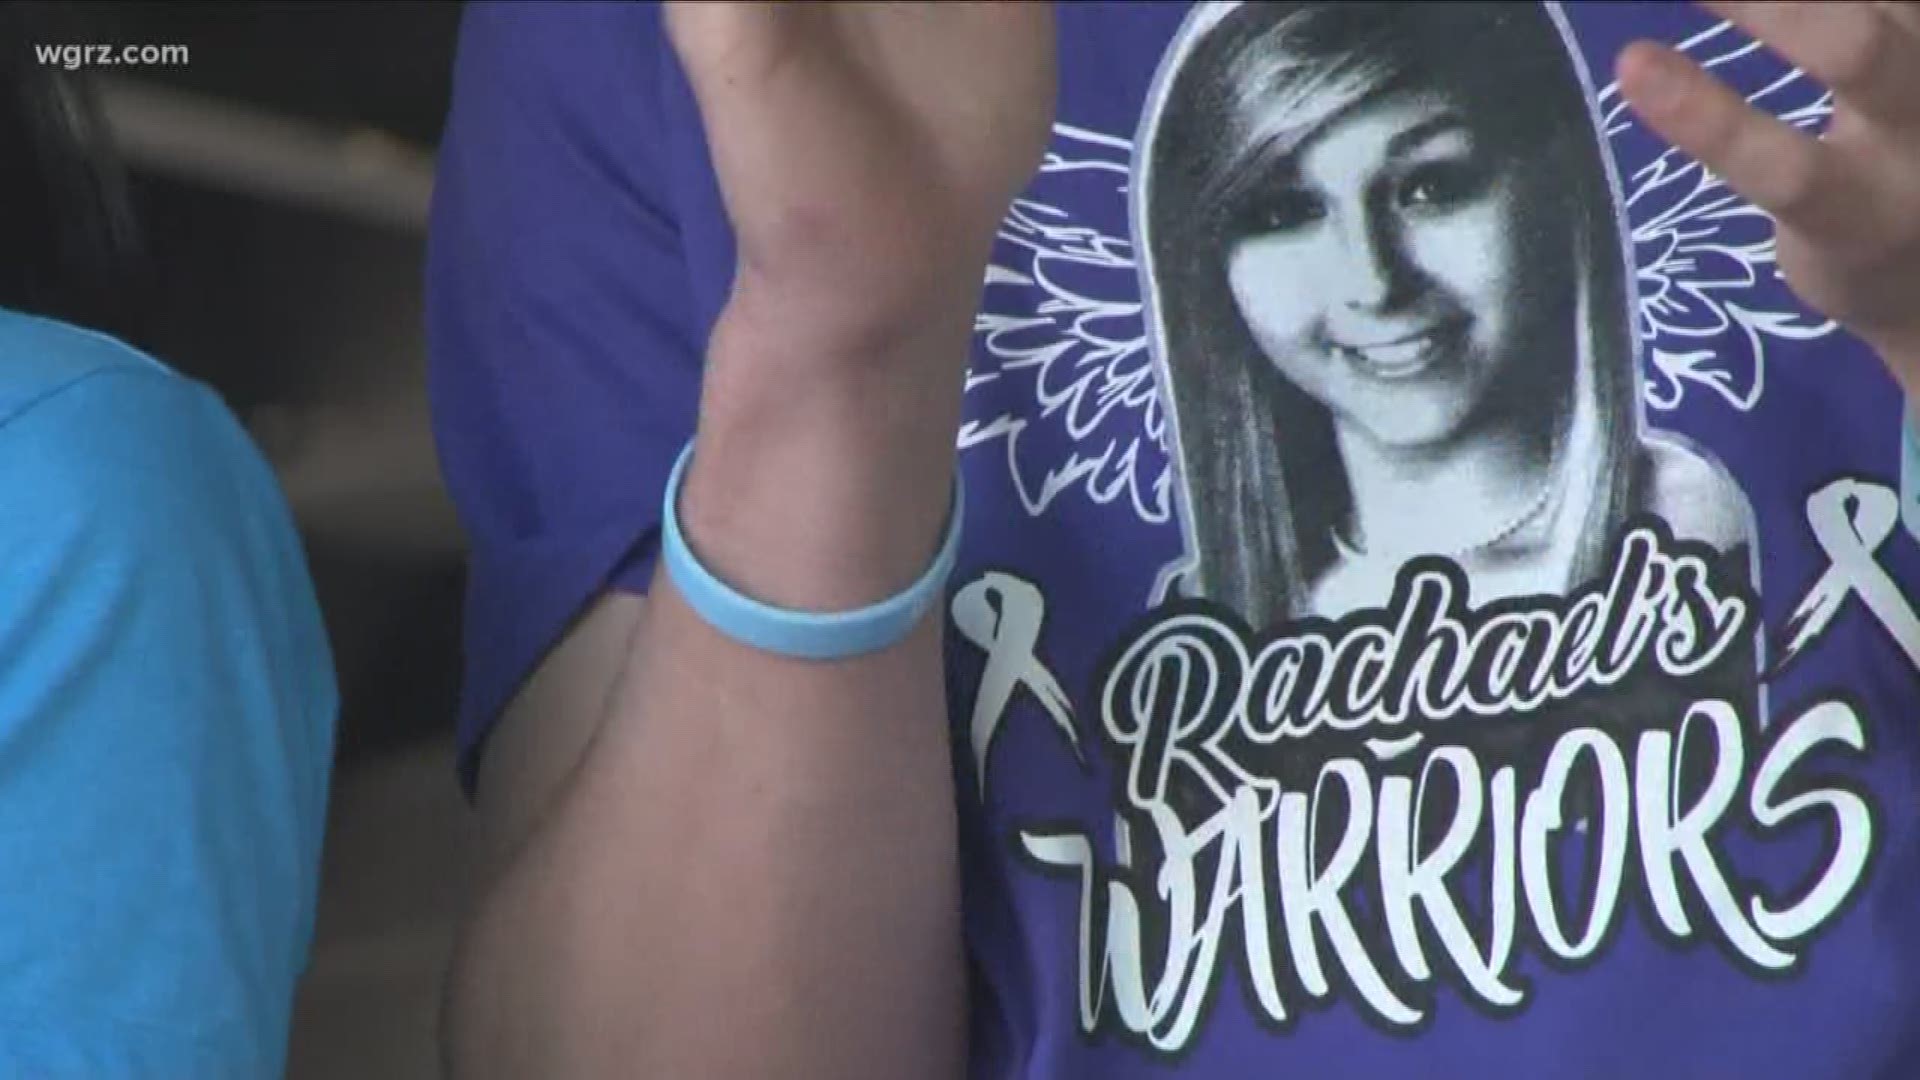 There's big fundraiser to raise money for victims of domestic violence in honor of 22-year-old Rachael Wierzbicki. Organizers are astounded by support.